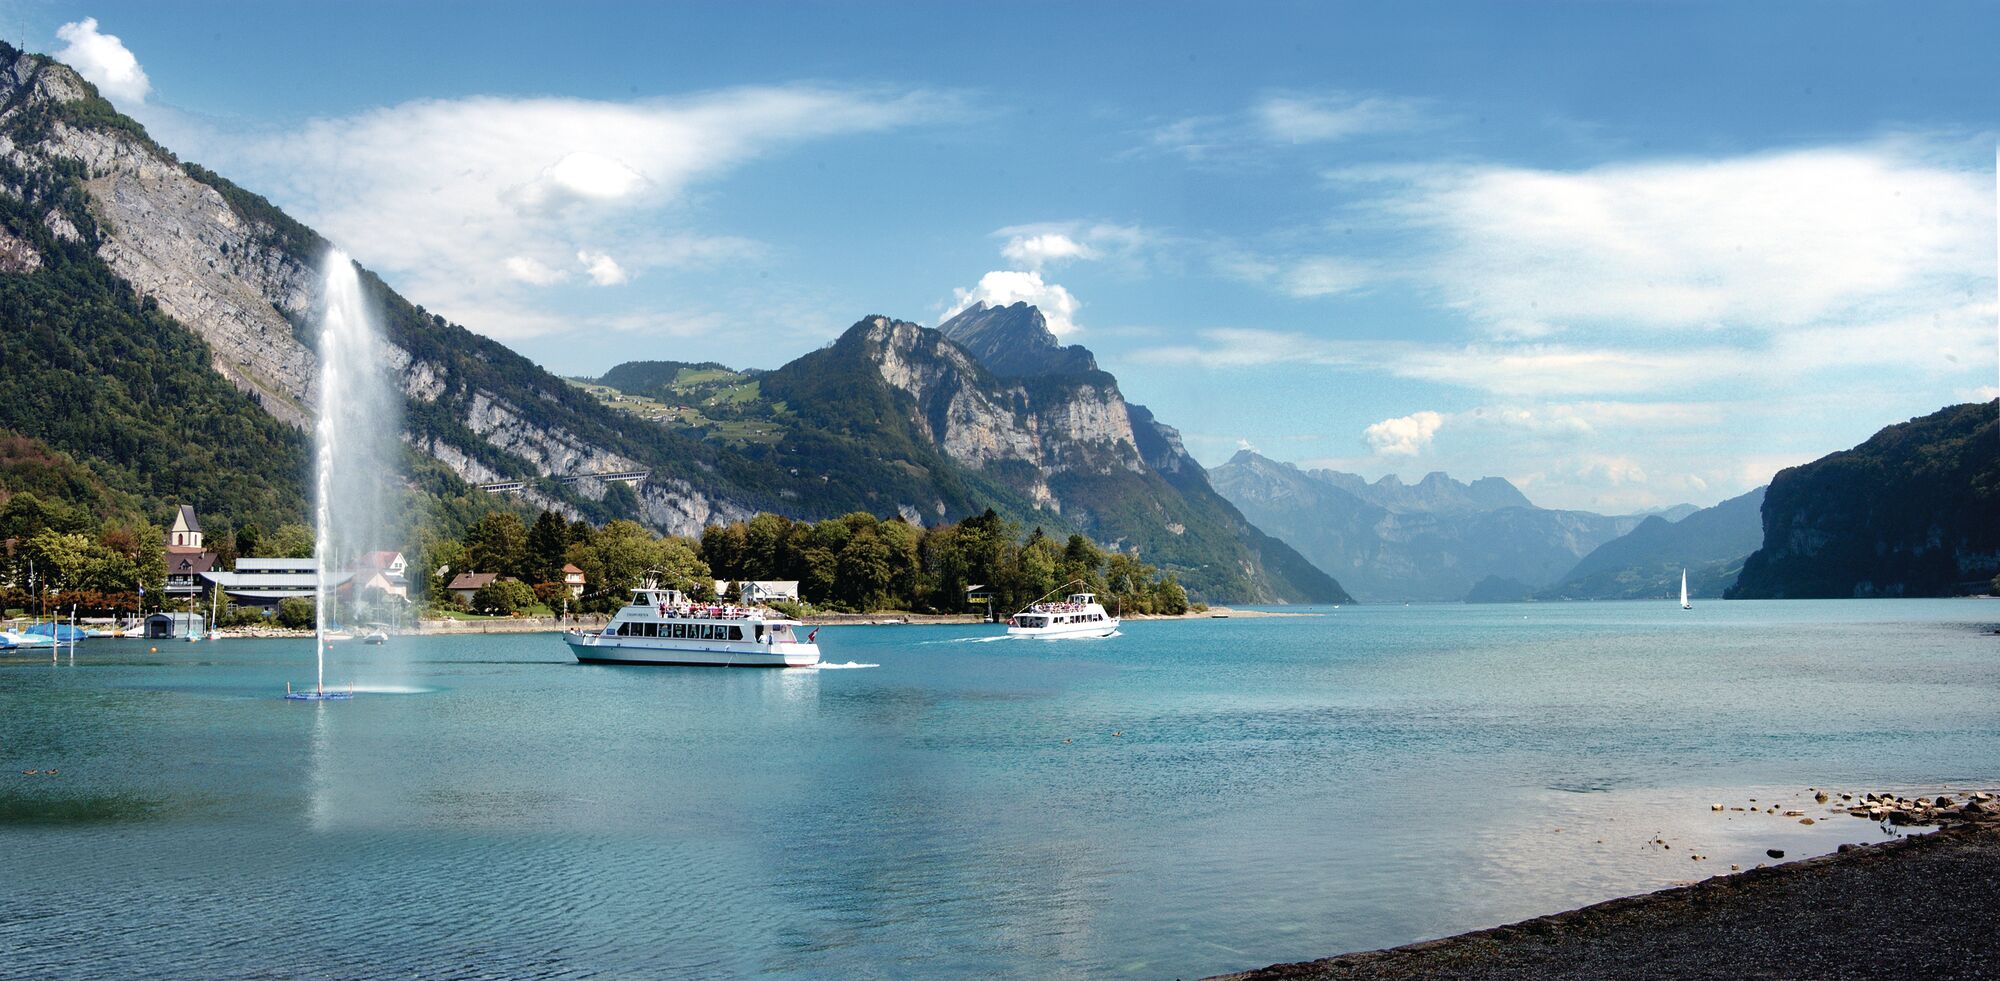 walensee boat tour